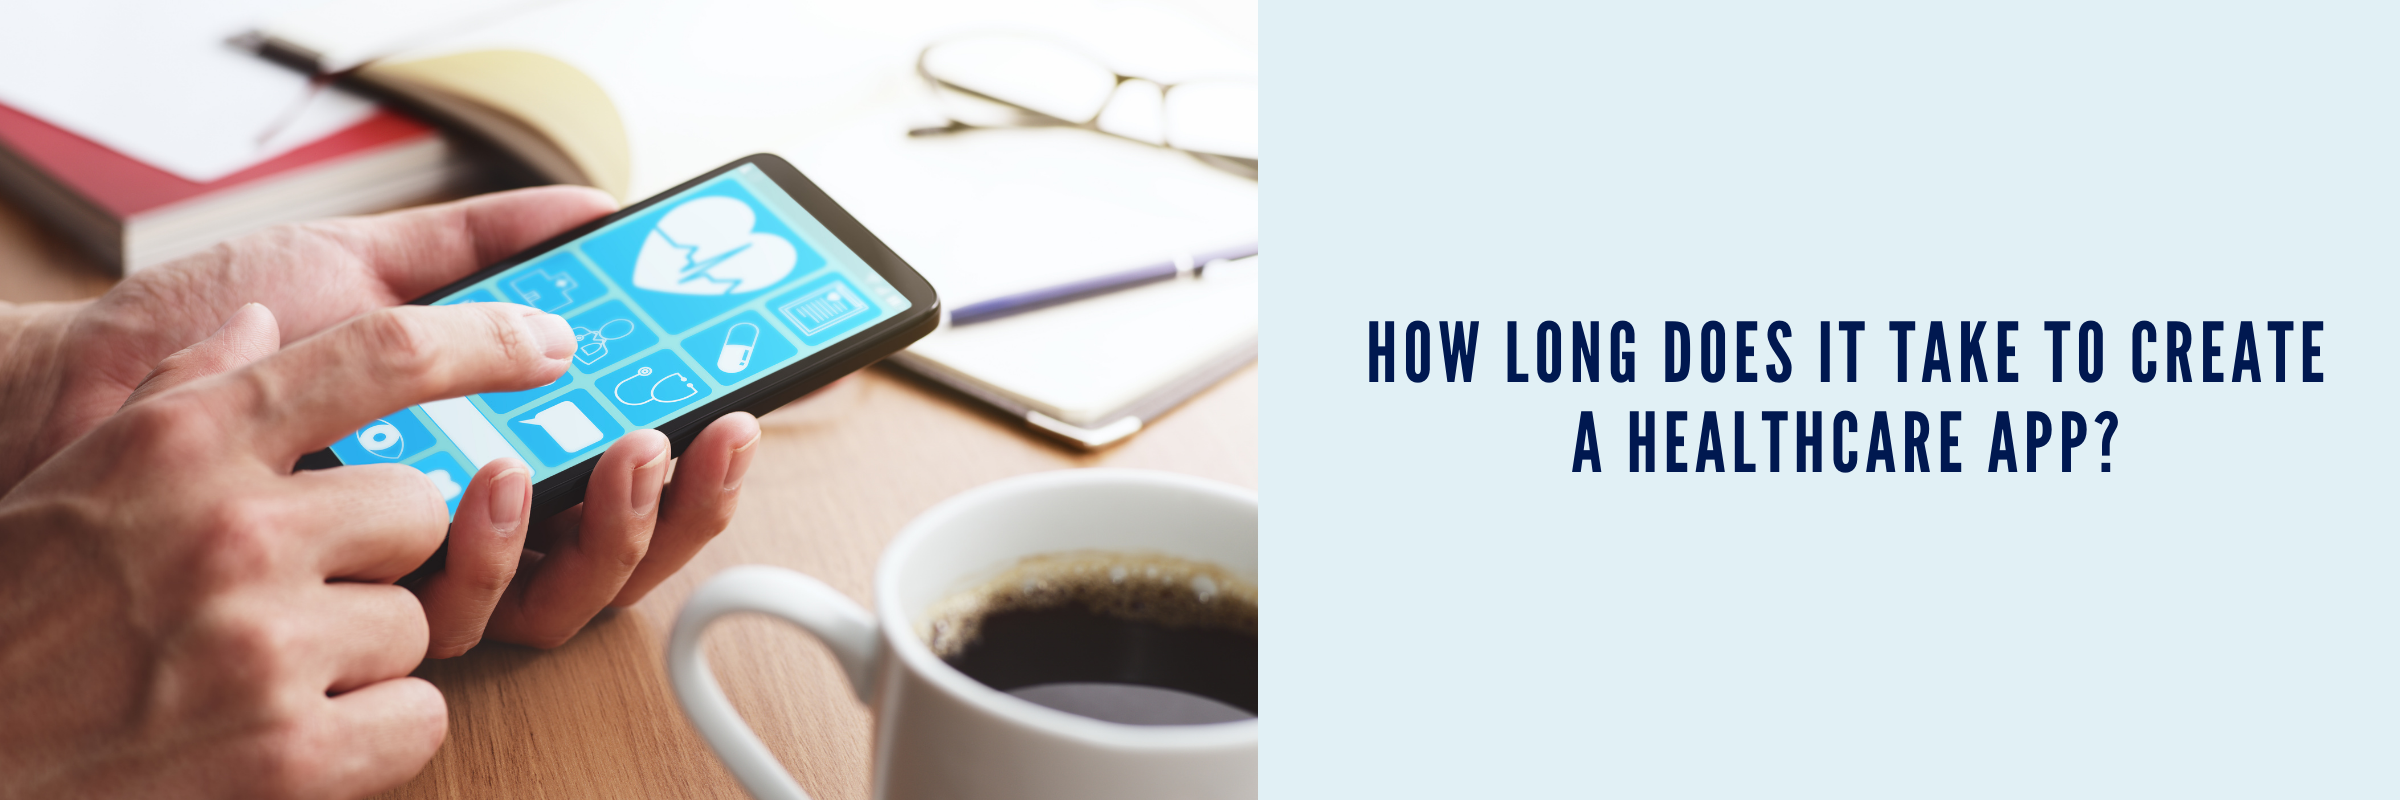 How Long Does It Take to Create a Healthcare App?